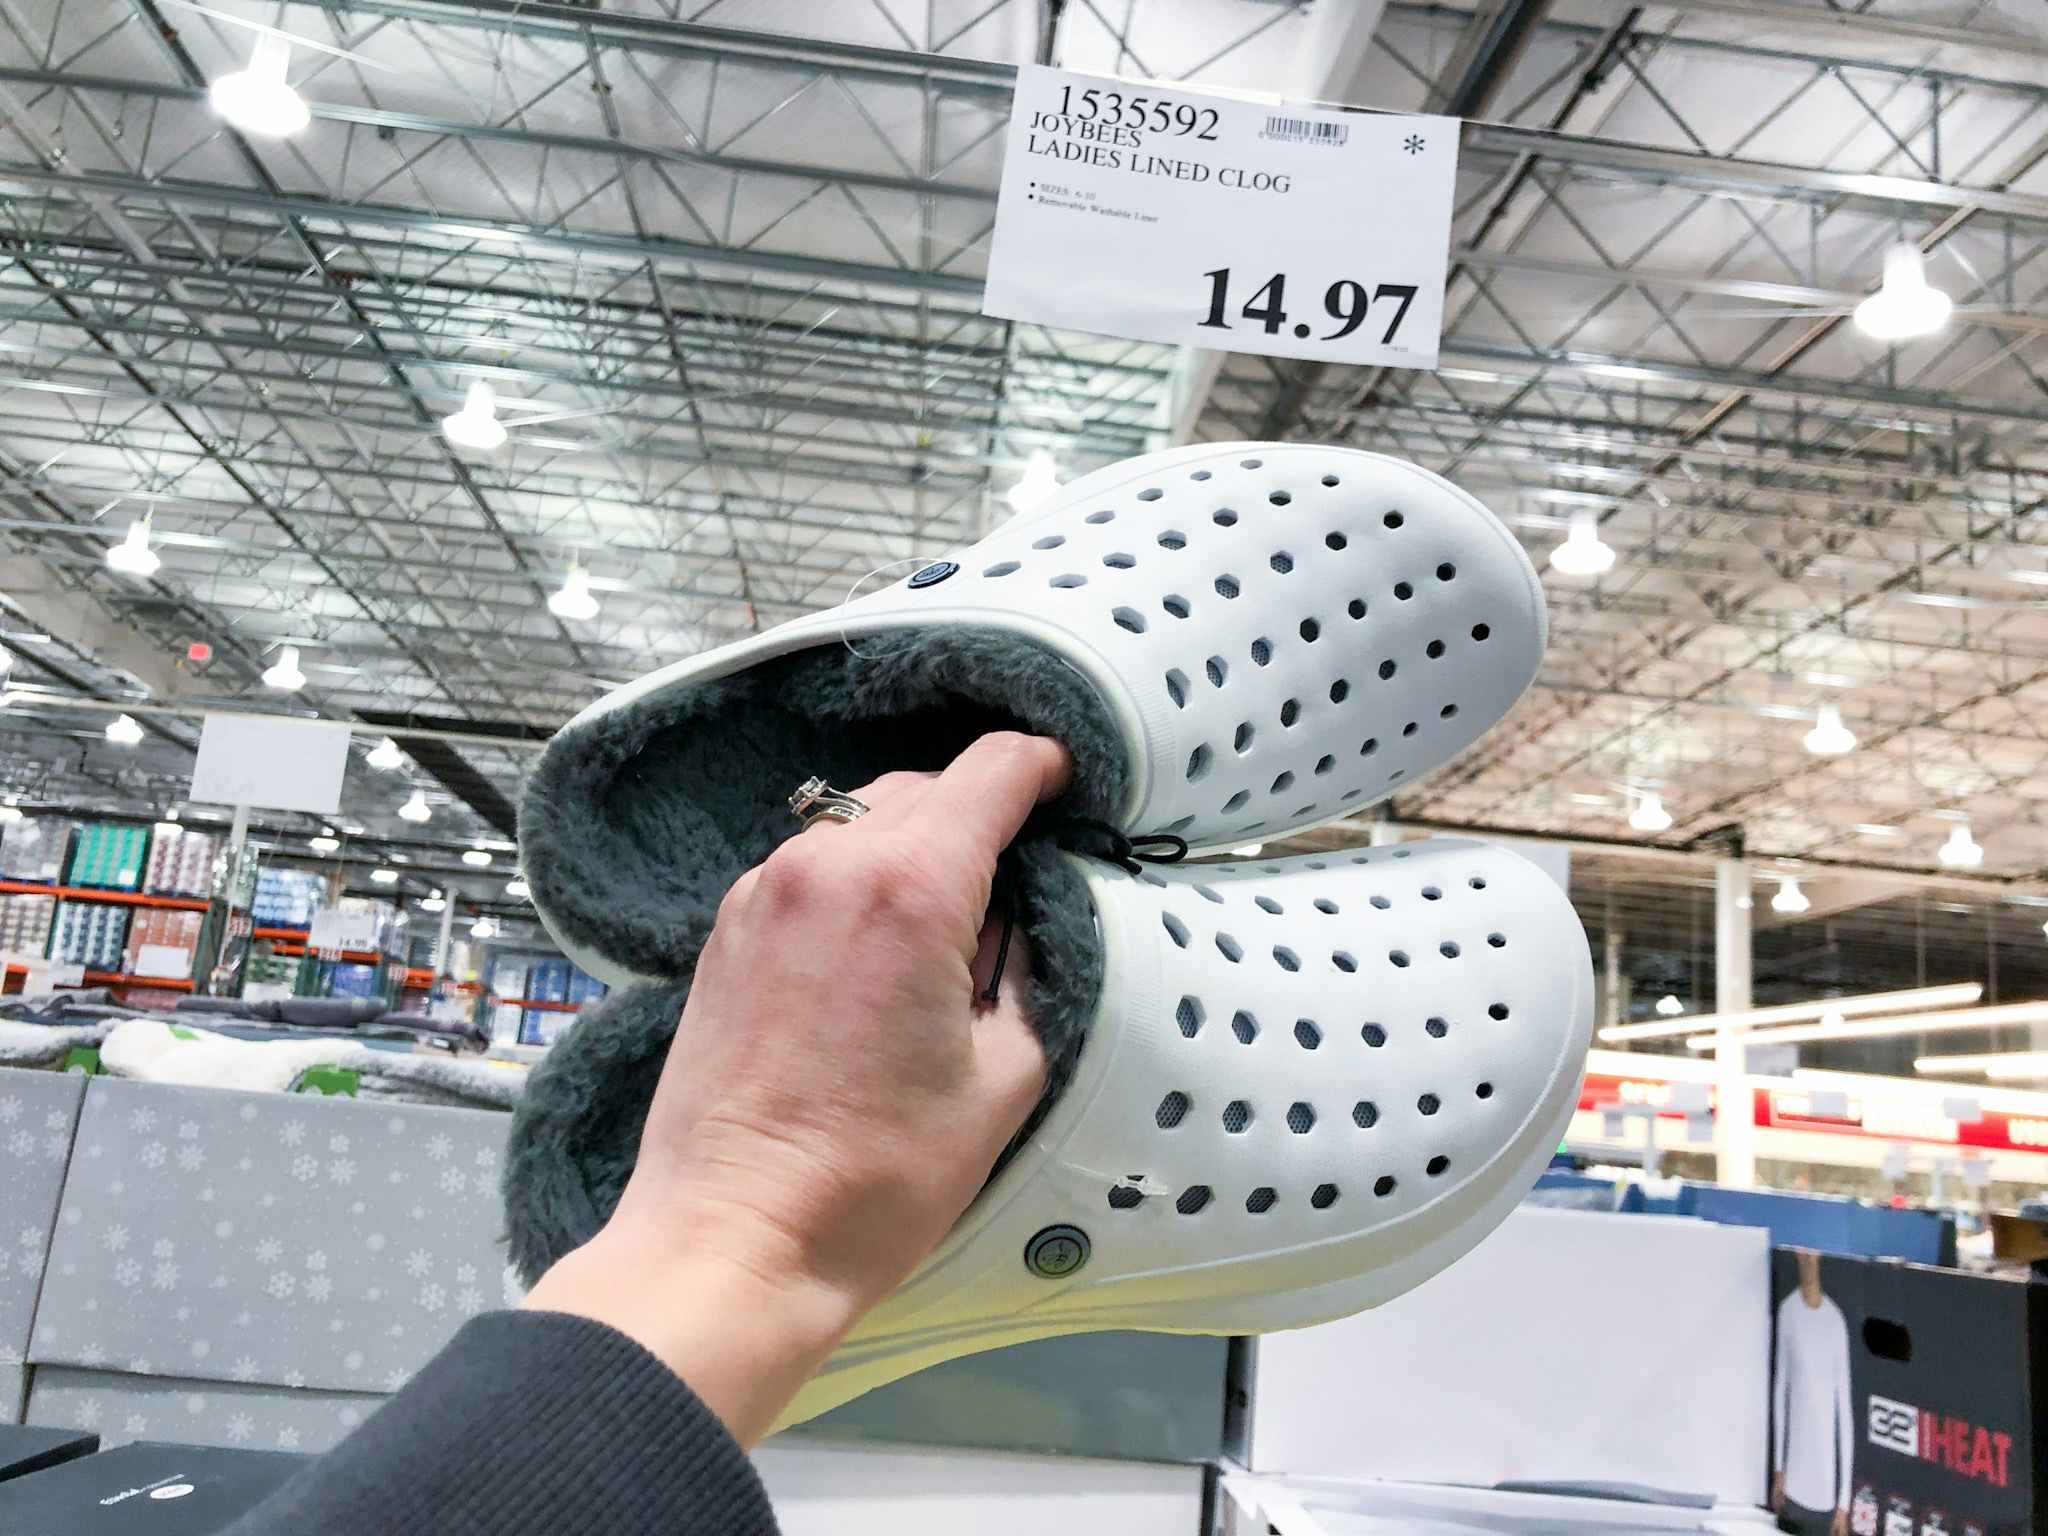 costco-joybees-lined-clogs-01192202